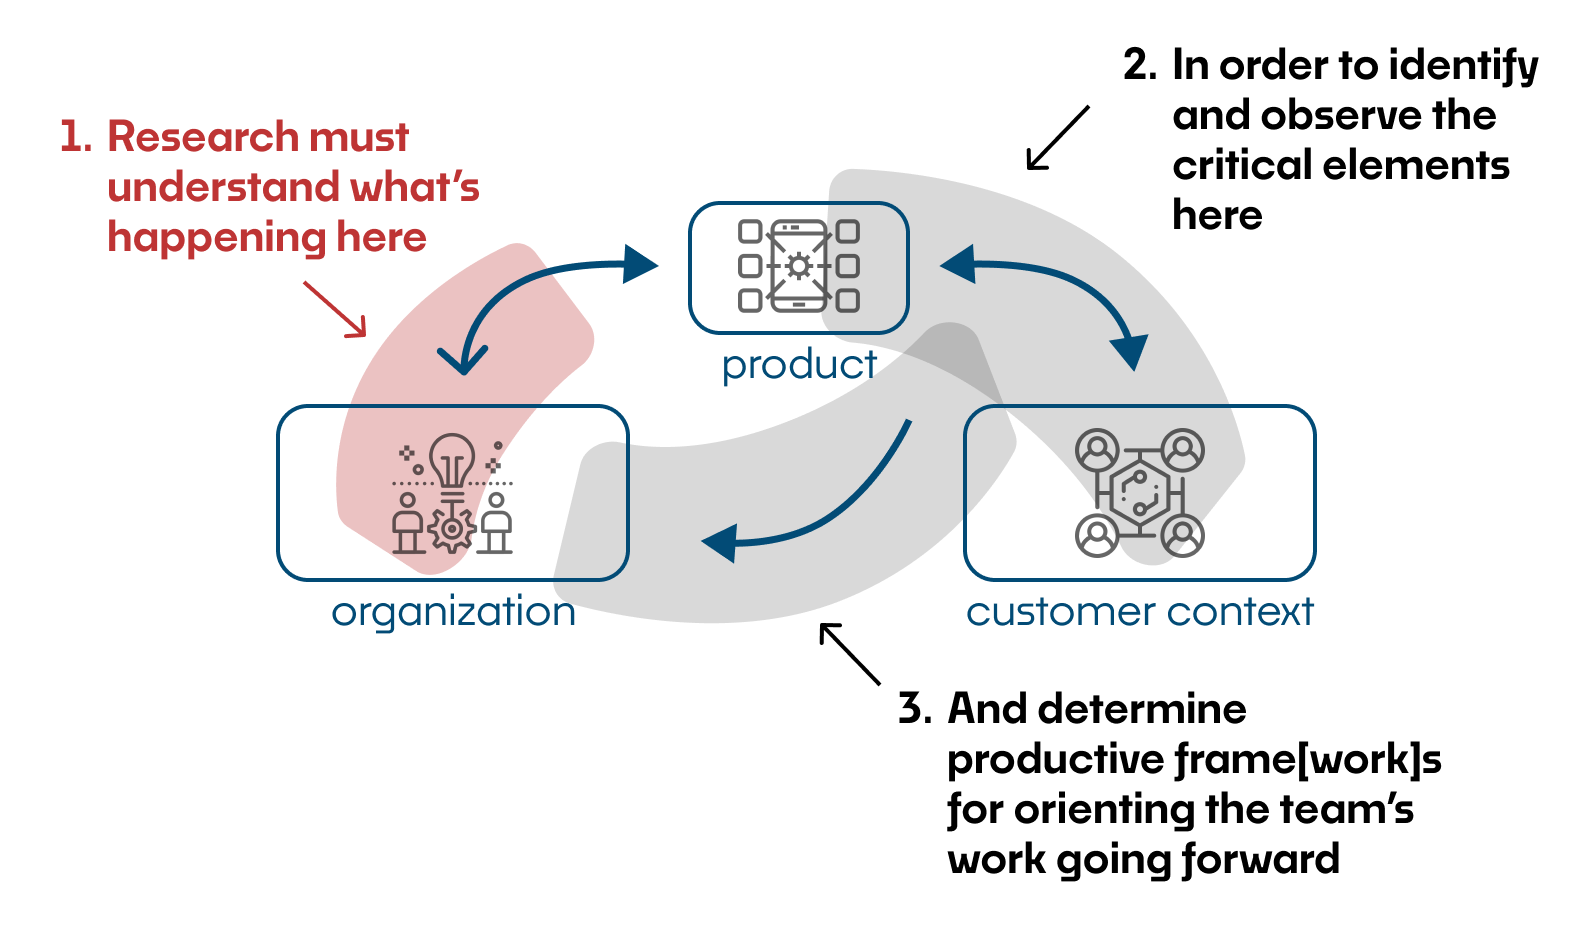 A diagram with three boxes, one each for “organization”, “product”, and “customer context”. An arrow labeled "1" points at the organization, and says "Research must understand what's happening here." An arrow labeled "2" points between the product and customer context and says "in order to identify and observe the critical elements here." An arrow labeled "3" points from the product—customer-context connection toward the organization, and says "And determine productive frameworks for orienting the team's work going forward."